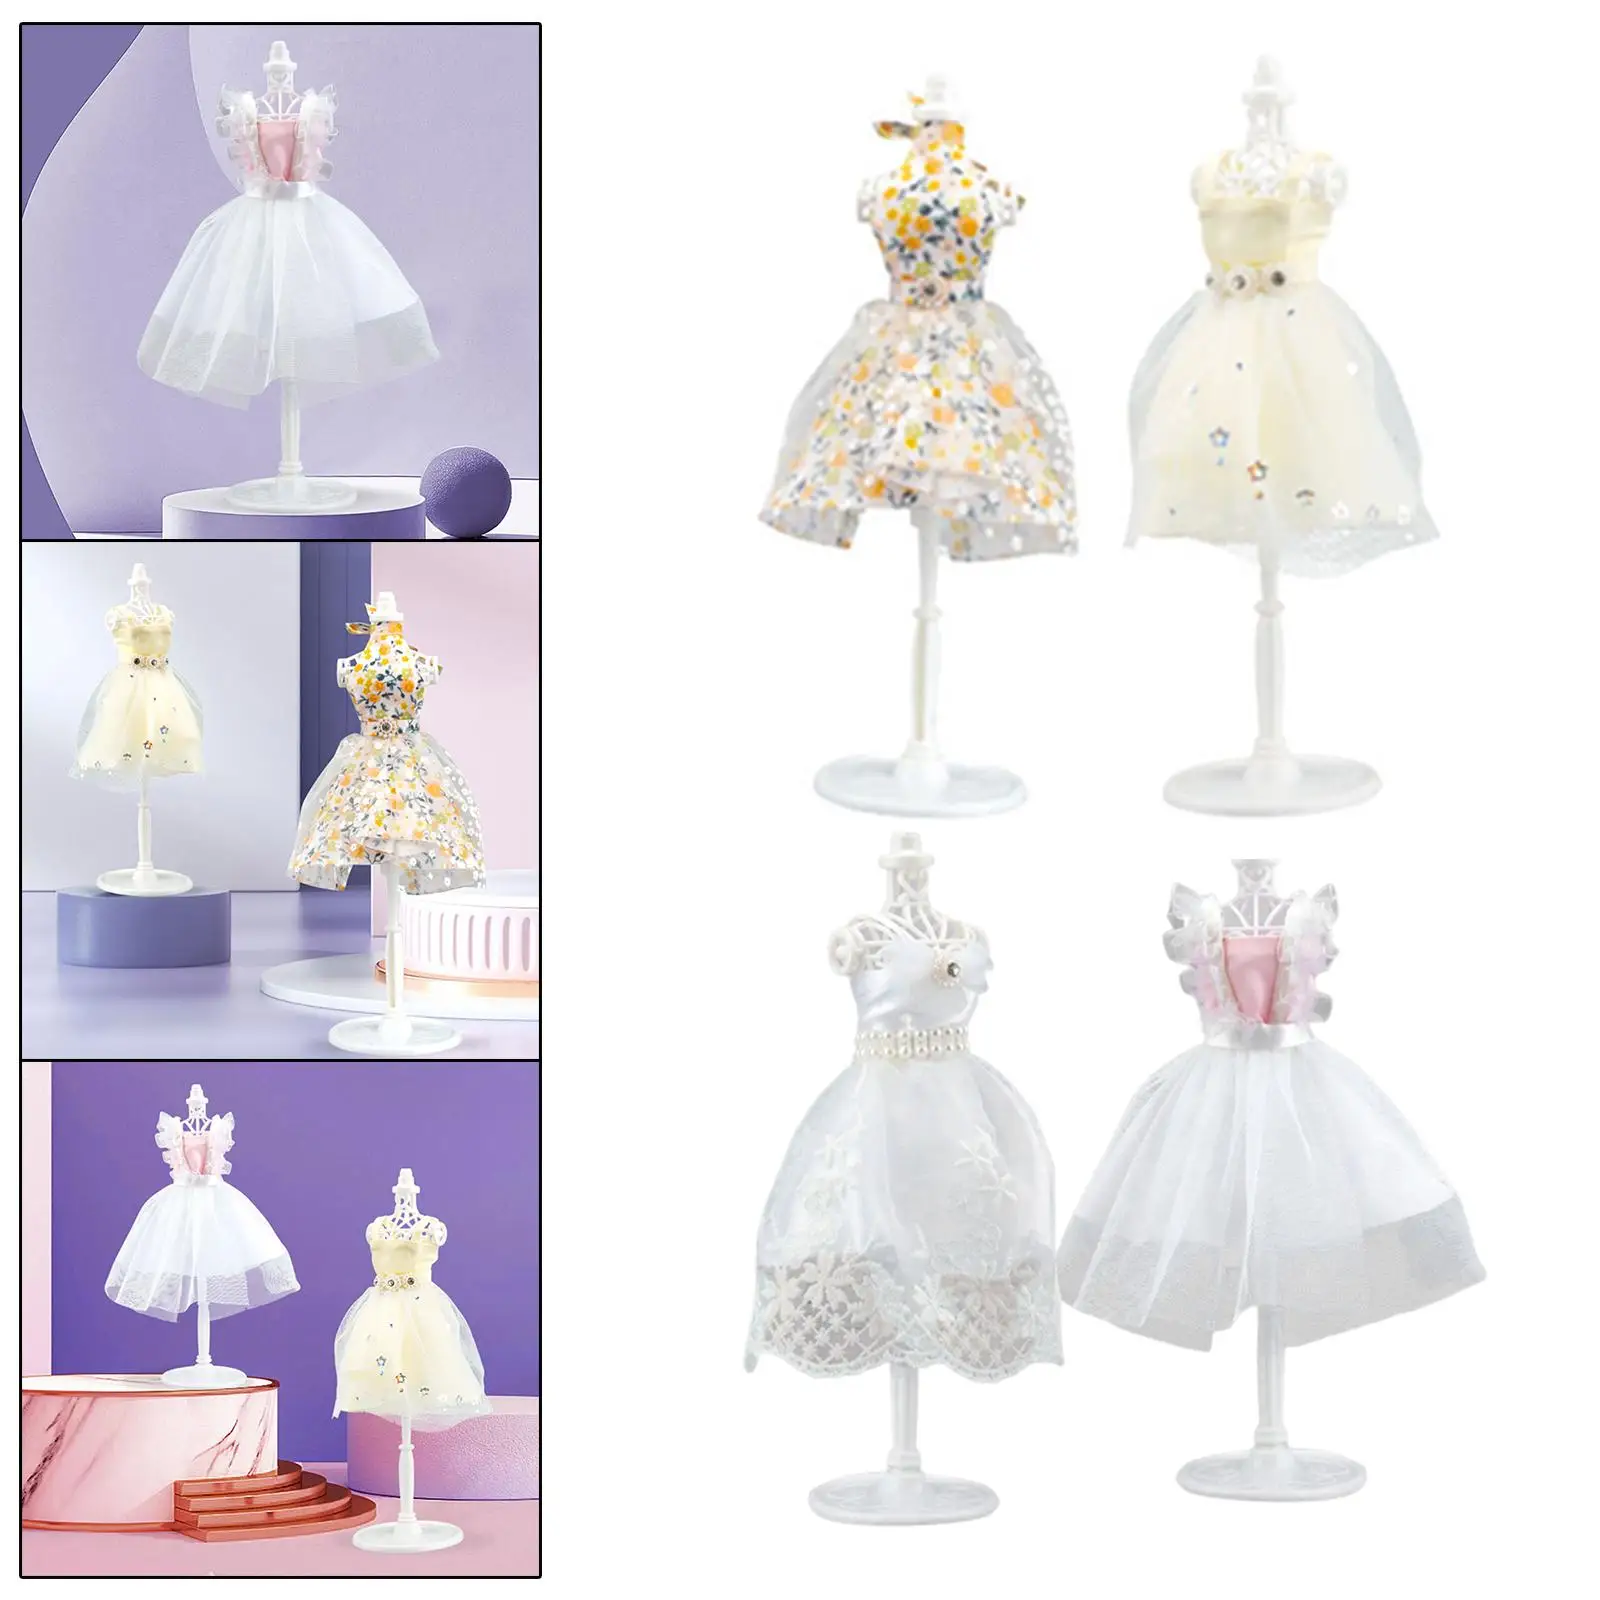 Doll Clothing design Princess Doll Clothes Making Creativity Princess Dress Clothes Set Fashion Design Kit for Party Girls